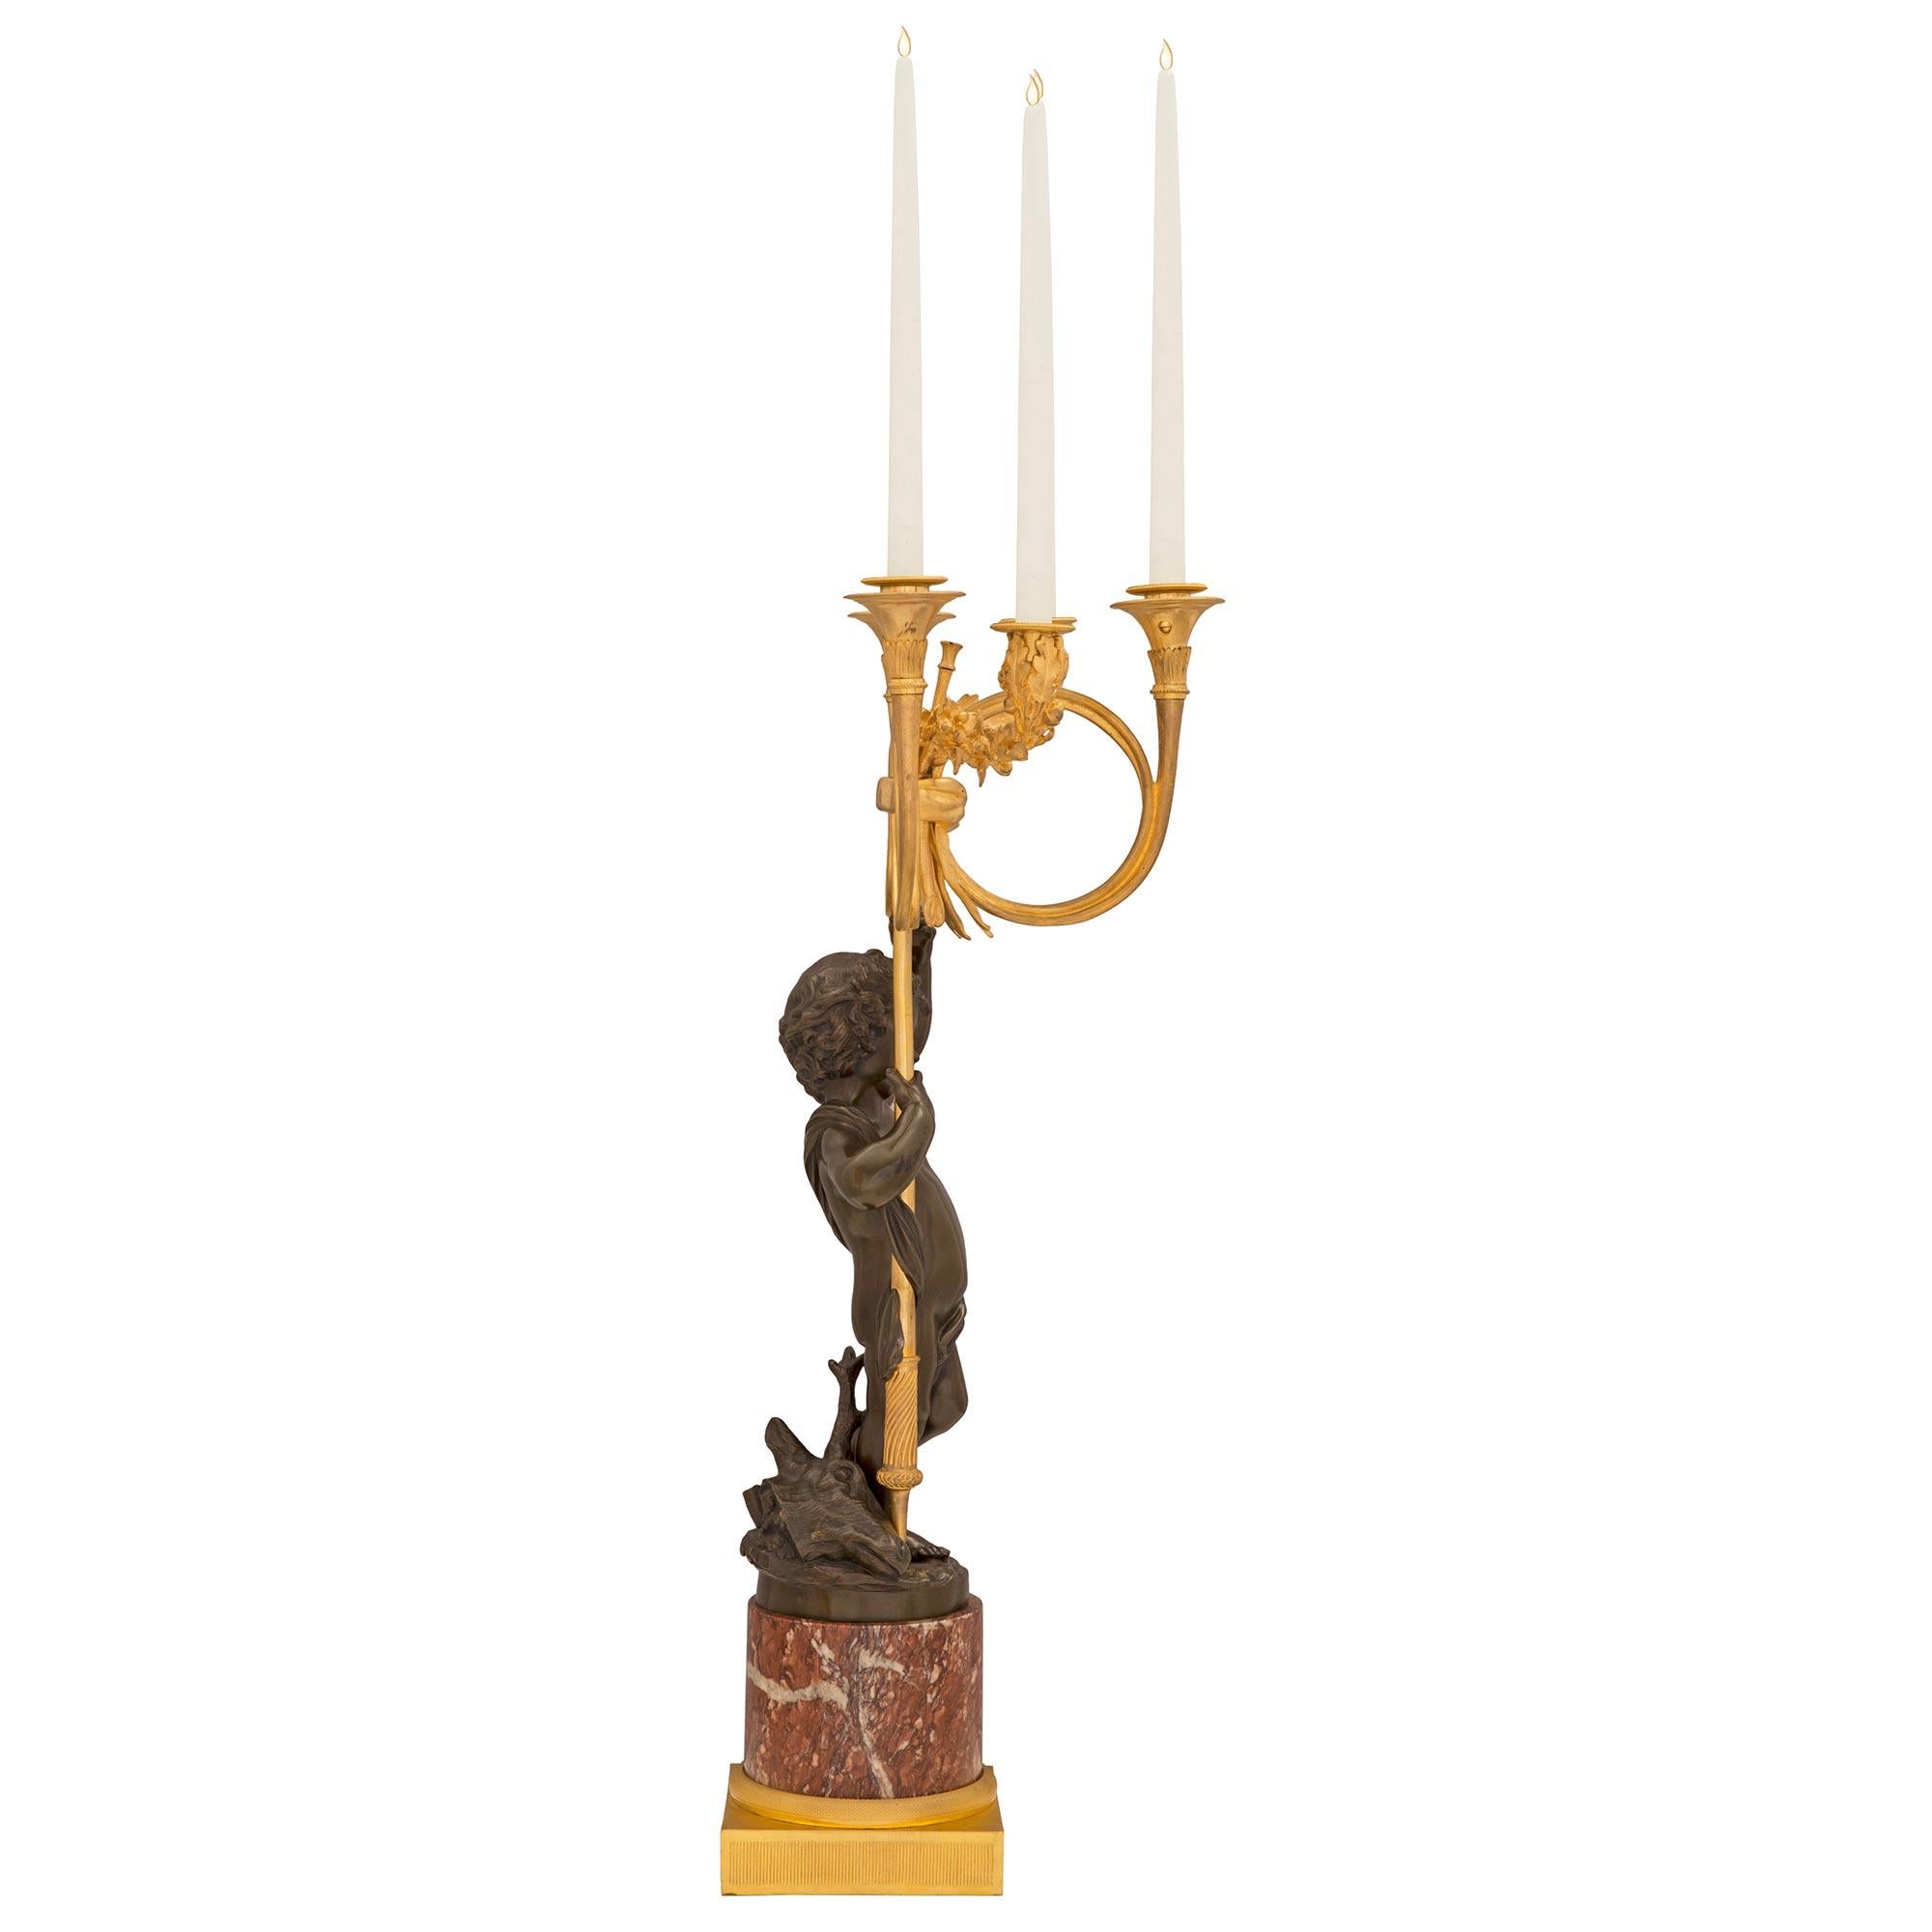 Pair of 19th Century French Louis XVI St. Bronze, Marble, and Ormolu Candelabras In Good Condition For Sale In West Palm Beach, FL